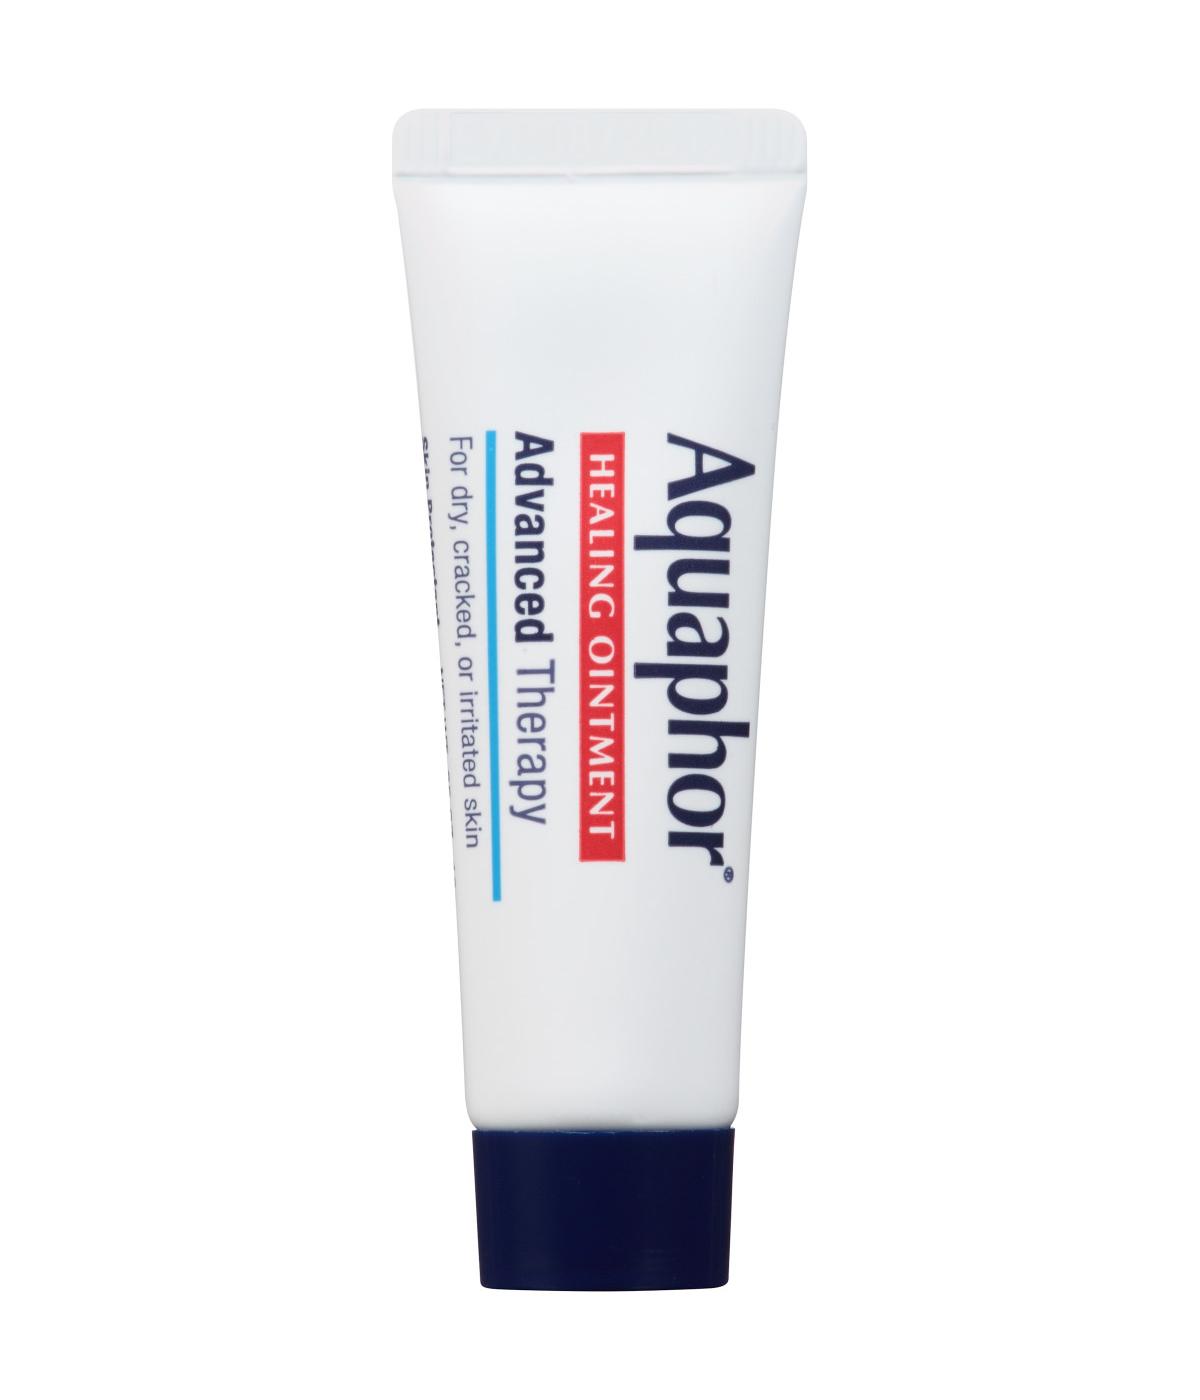 Aquaphor Advanced Therapy Healing Ointment Skin Protectant 2 Tubes; image 3 of 3